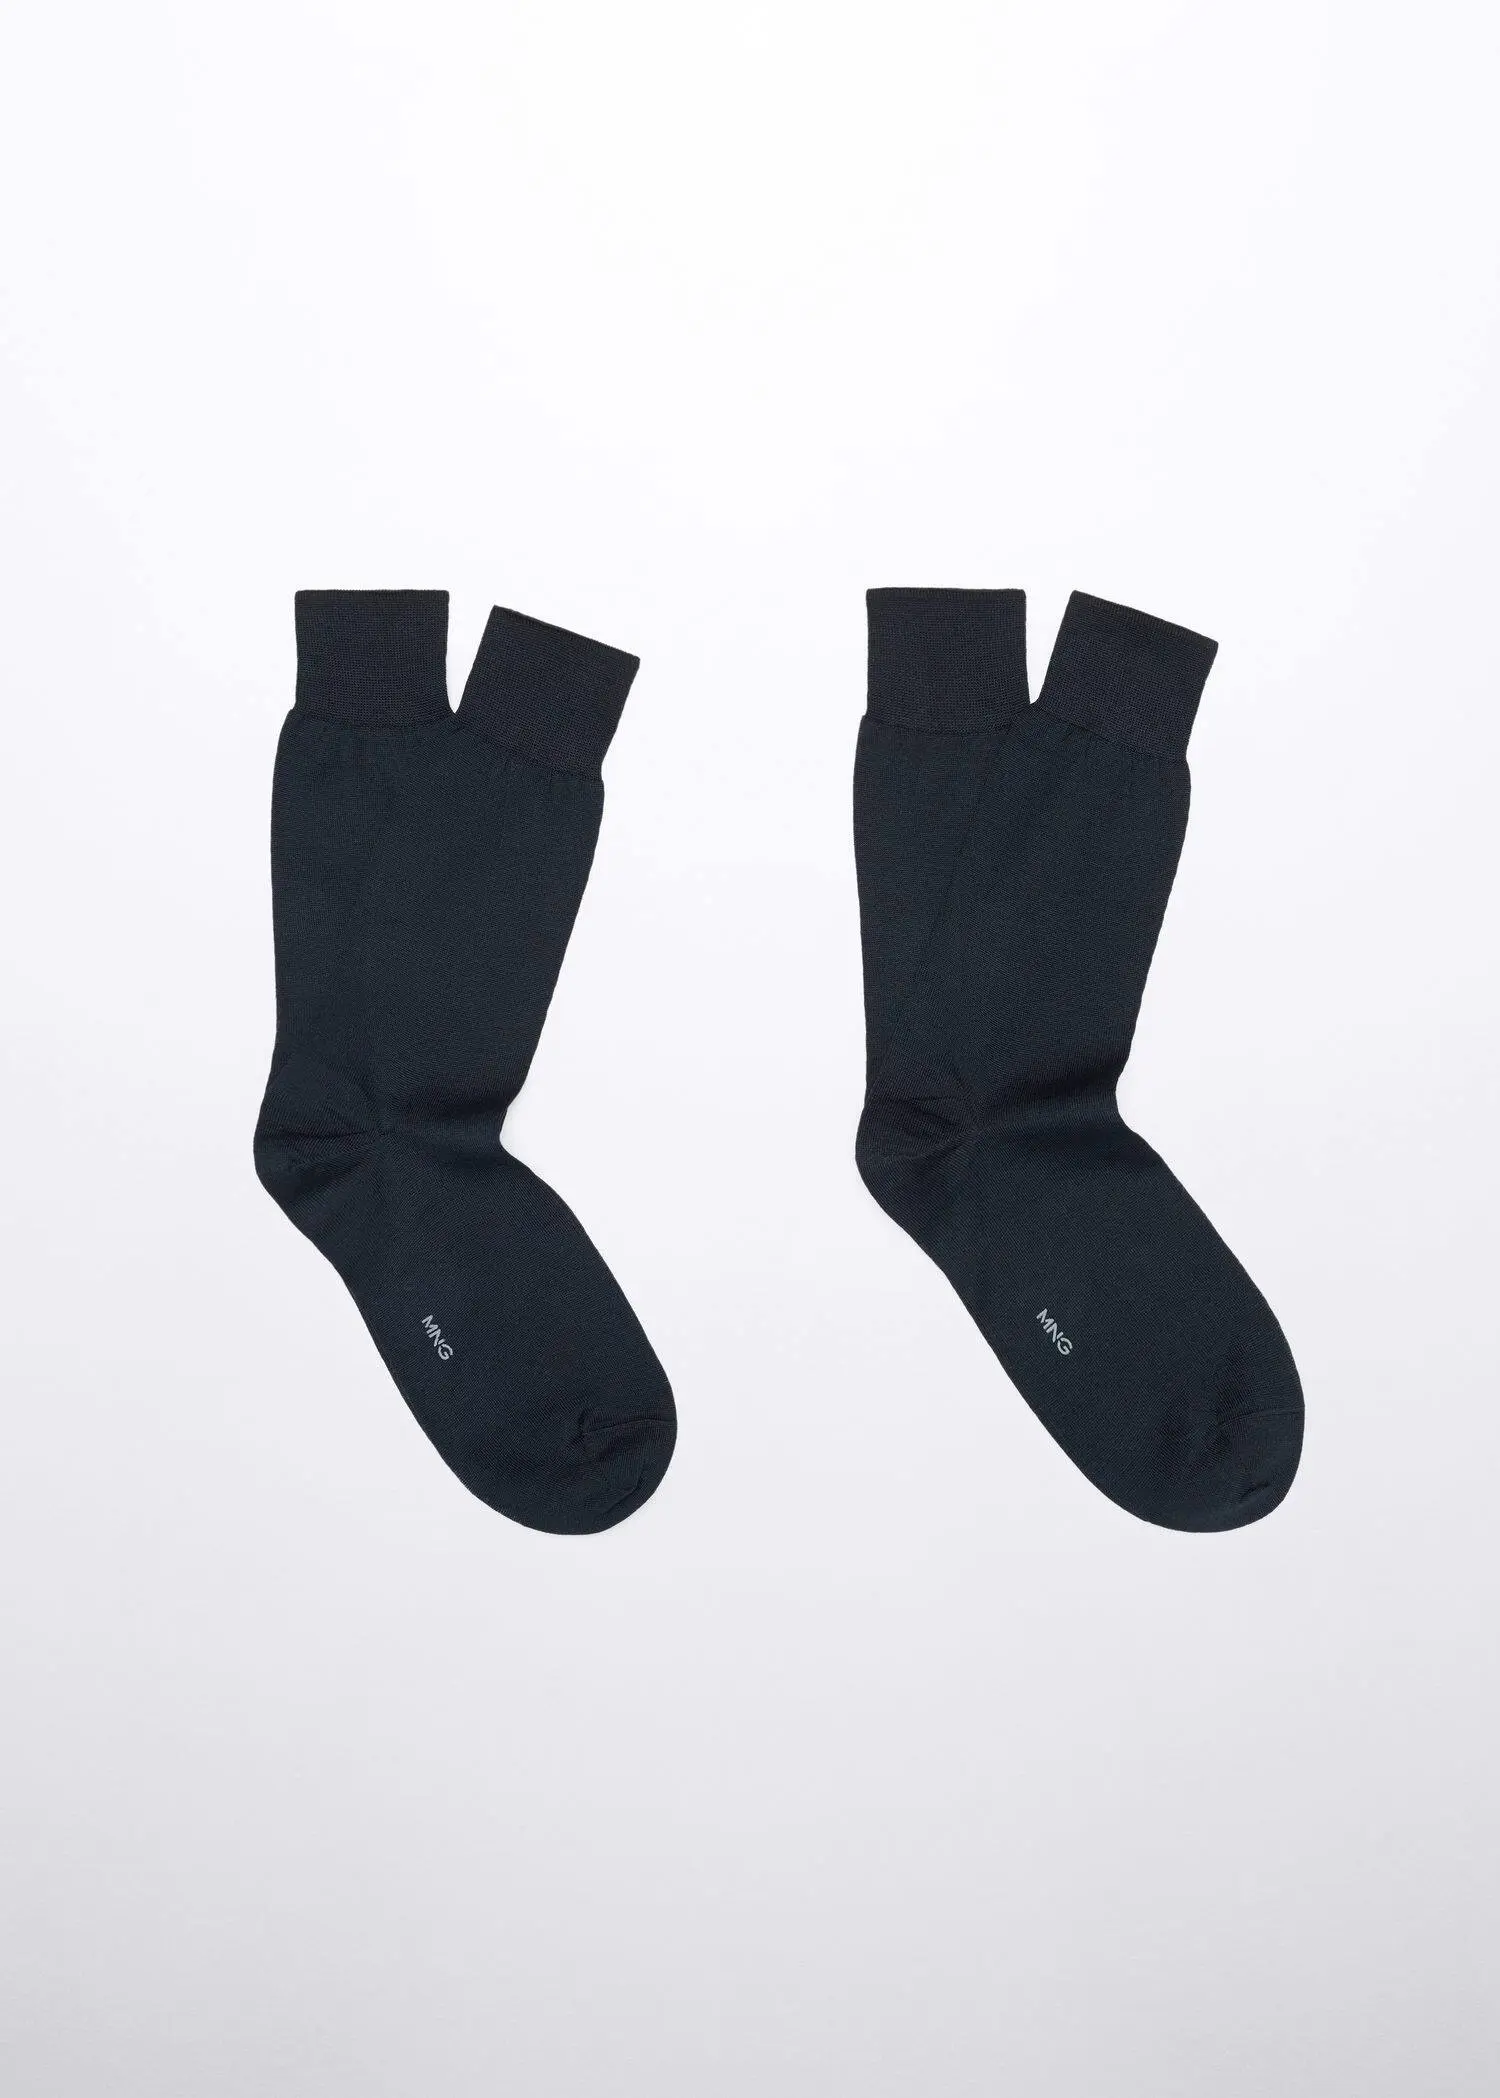 Mango Pack of 2 100% plain cotton socks. a pair of socks that are on the ground. 